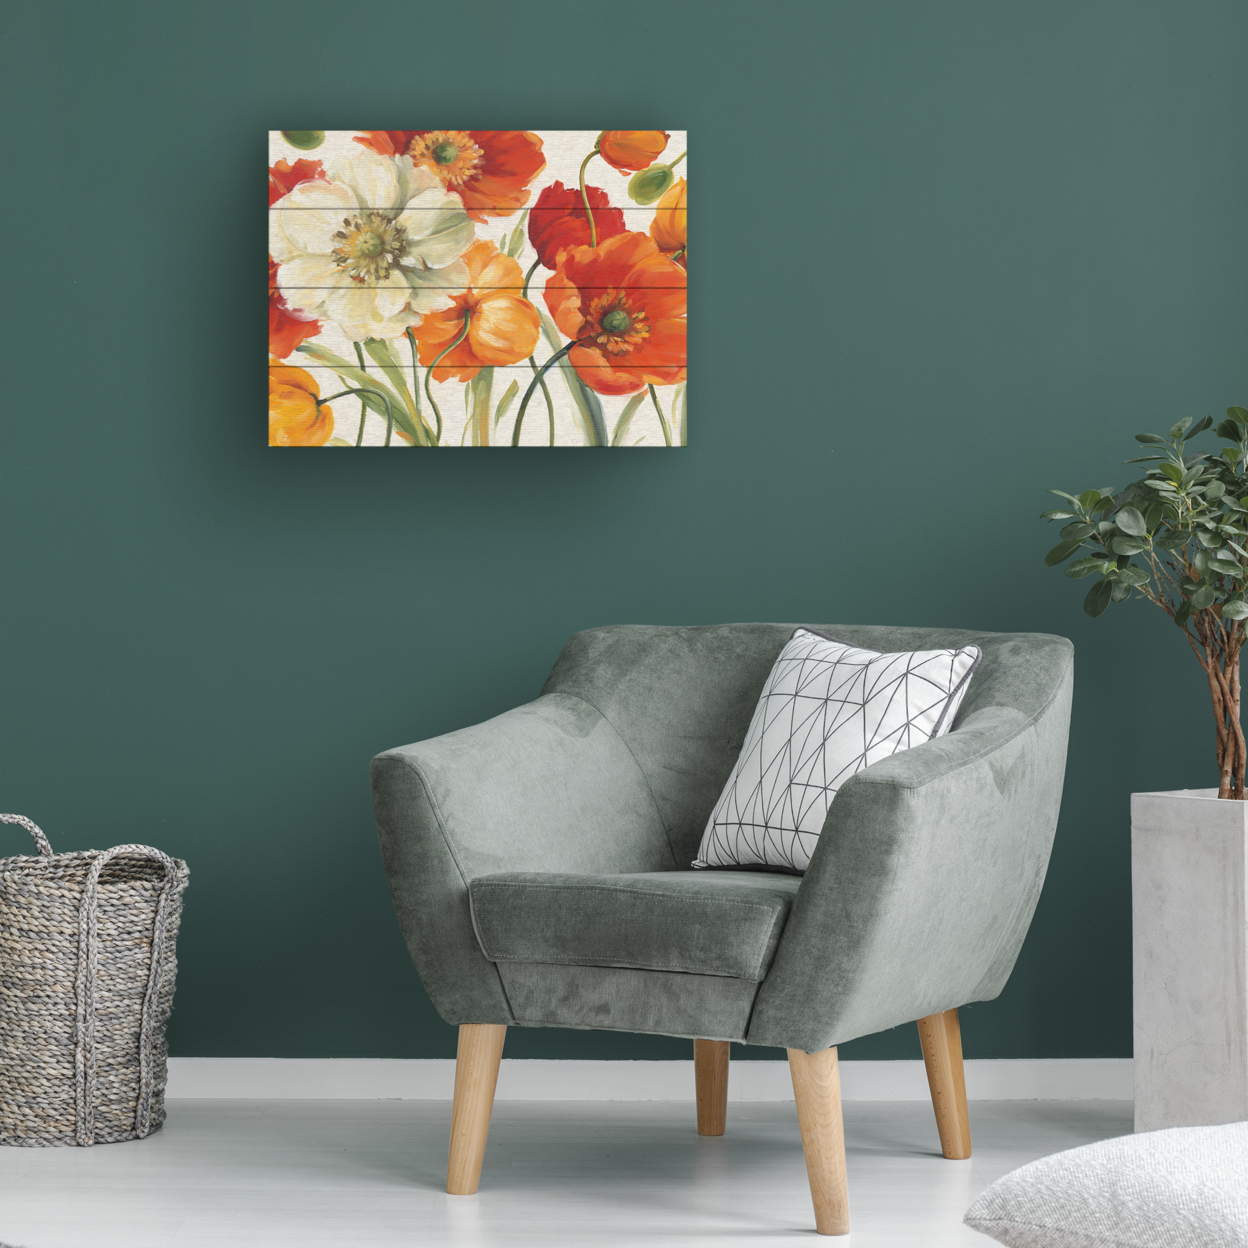 Wall Art 12 X 16 Inches Titled Poppies Melody I Ready To Hang Printed On Wooden Planks